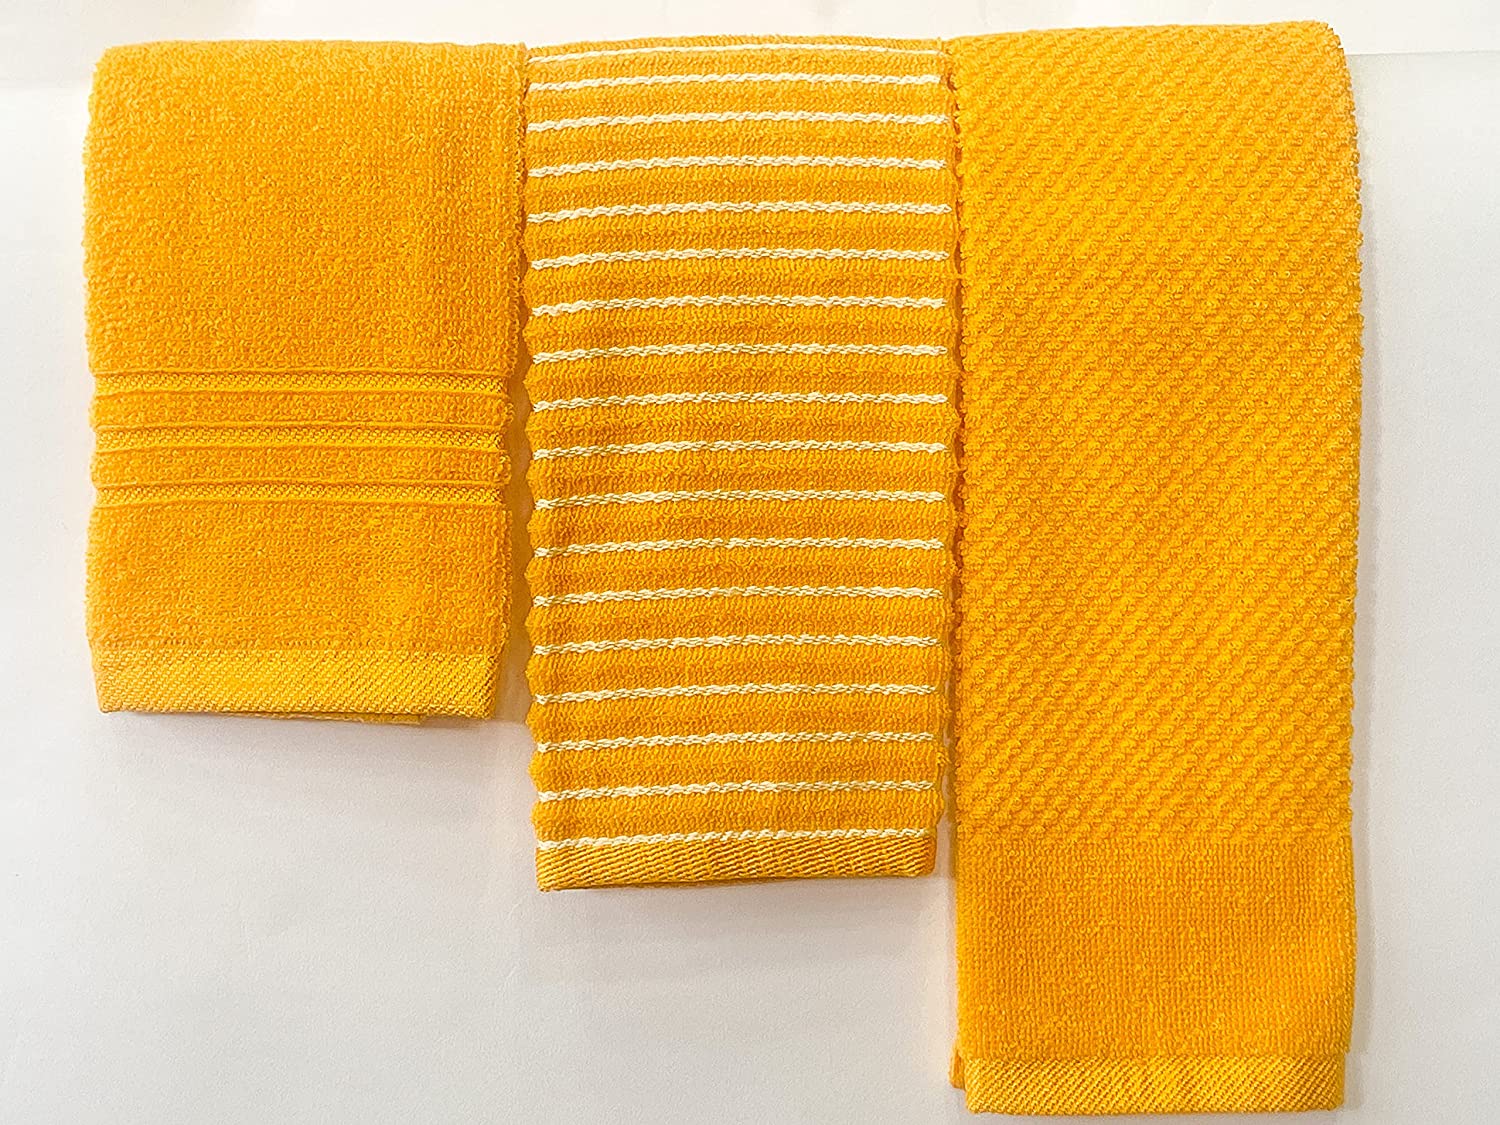 Lushomes Cotton Kitchen Towels, Hand Towel Set of 6, Napkin for Hand Towels, hand towel for wash basin, face towel for men (Pack of 3, 34 x 51 cms, Golden Yellow)